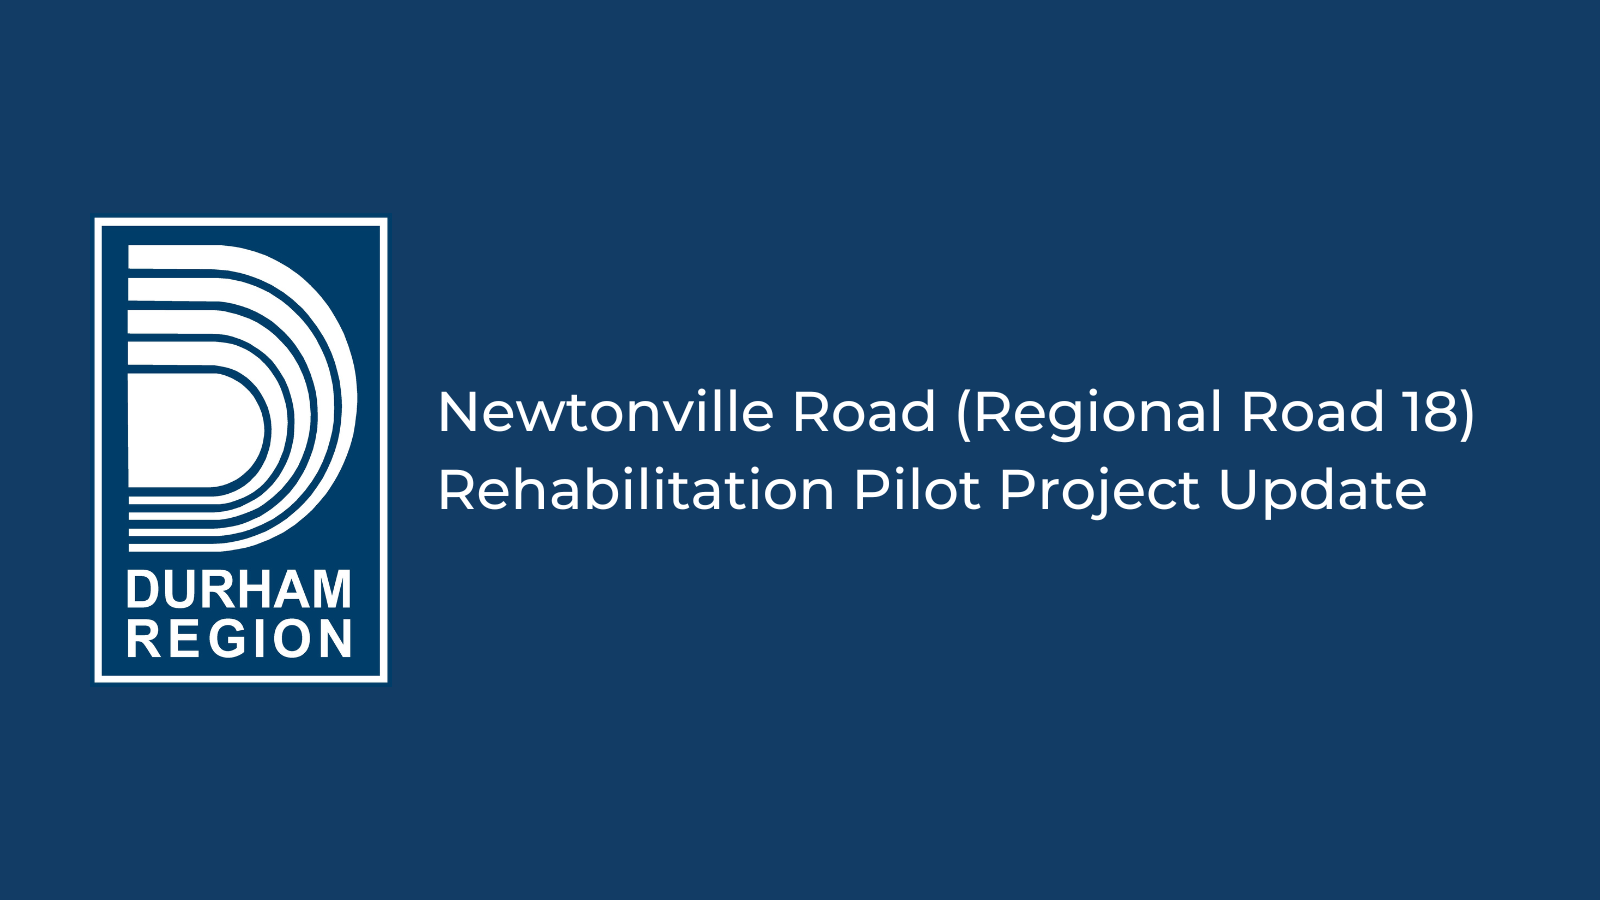 Navy graphic with Durham Region logo and white text Newtonville Road (Regional Road 18) Rehabilitation Pilot Project Update 